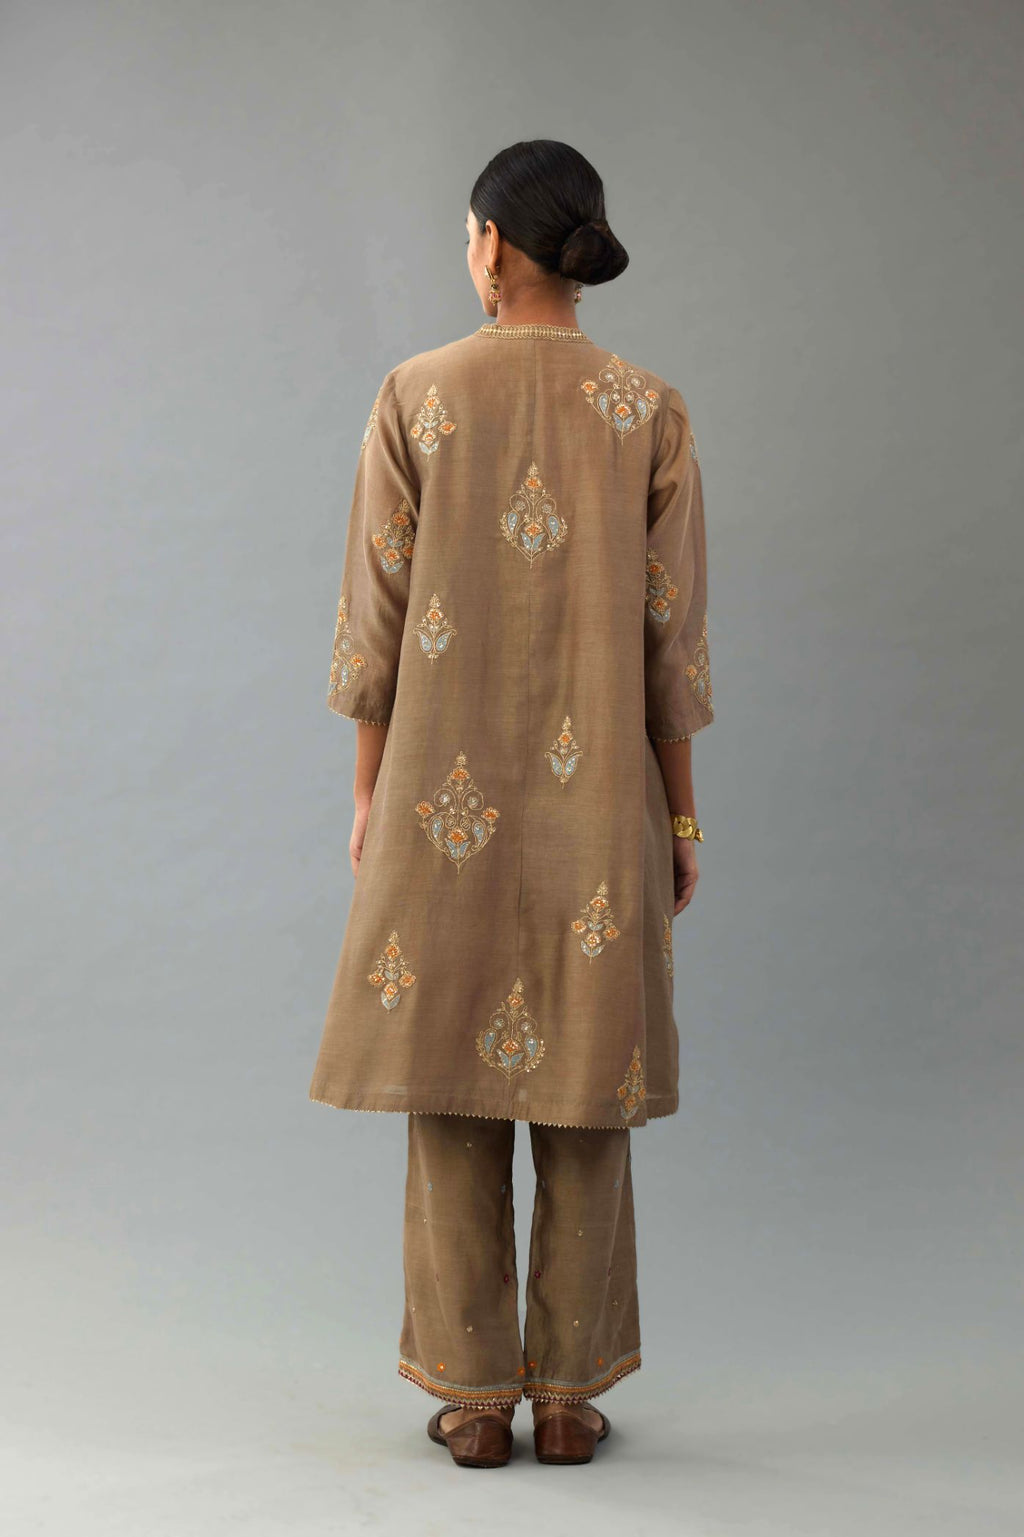 Taupe Silk Chanderi short kurta set with collar and front placket, detailed with delicate gold embroidery is done around the placket and collar.